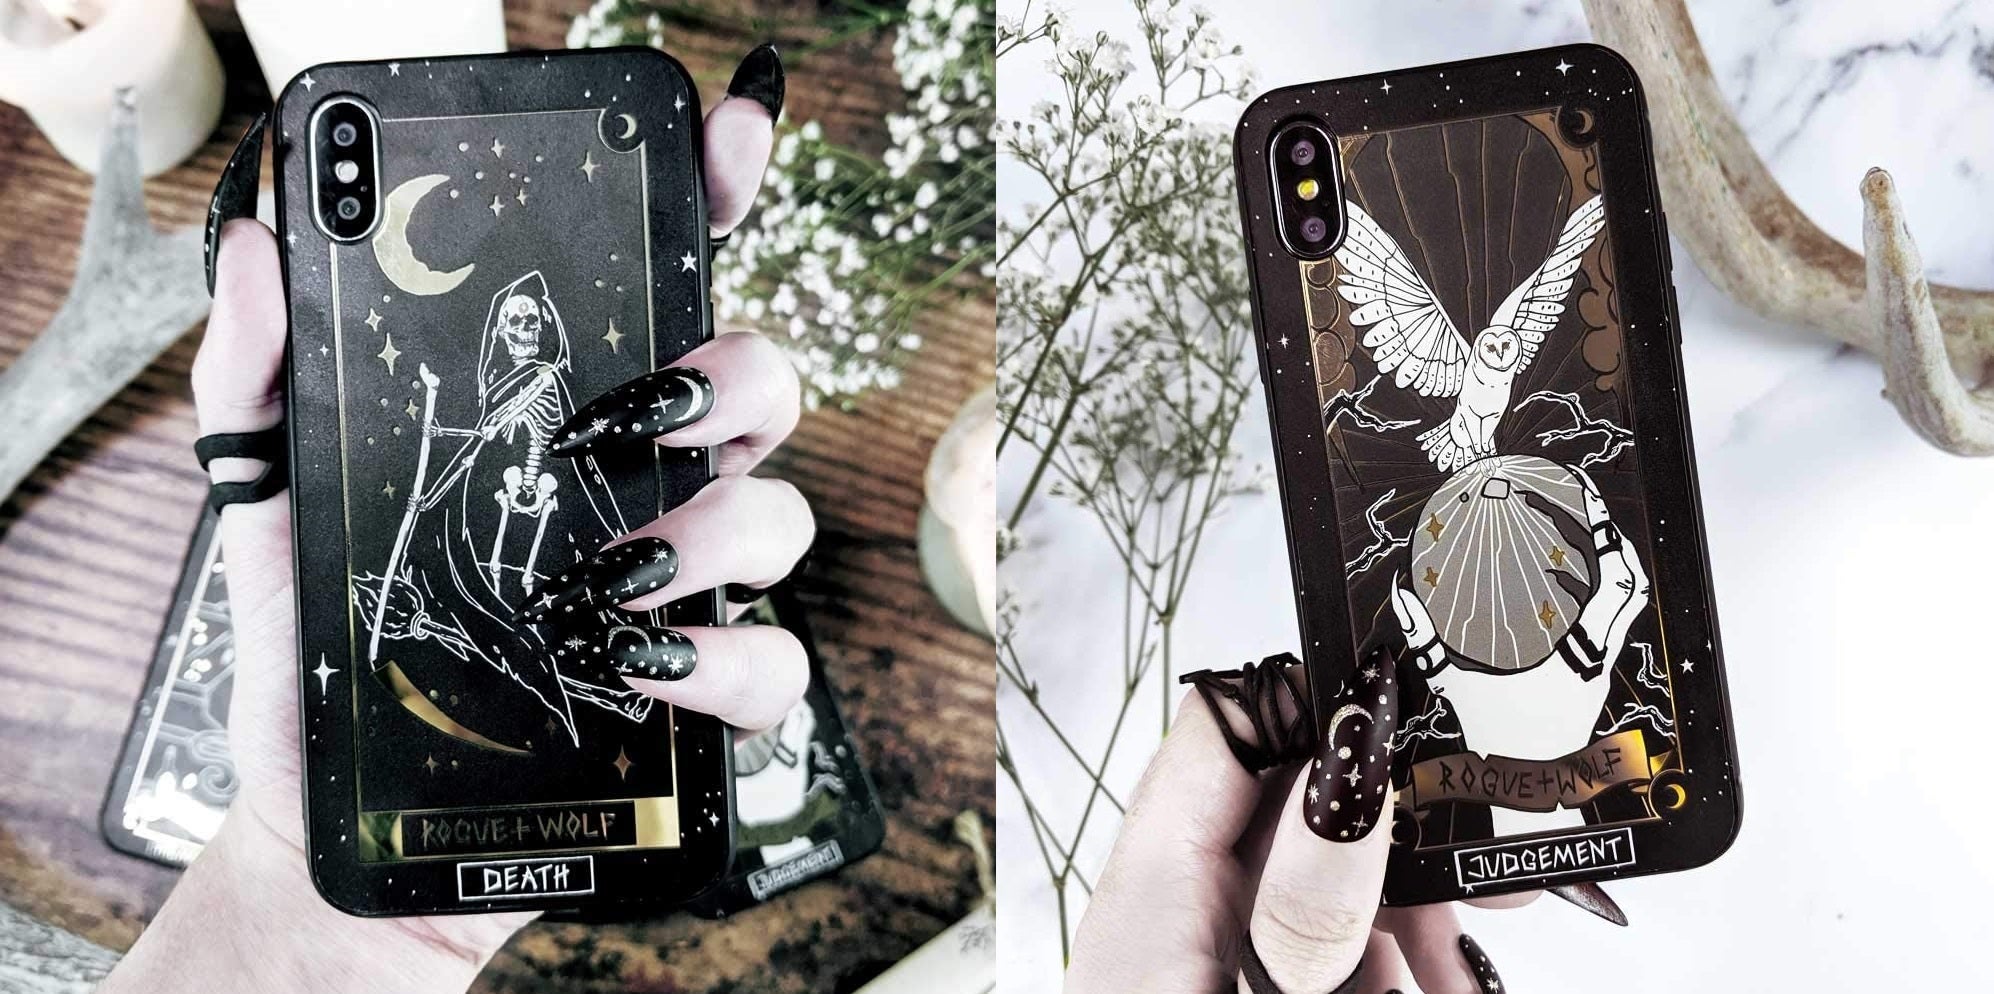 Coolest Halloween iPhone cases to get for the spooky holiday